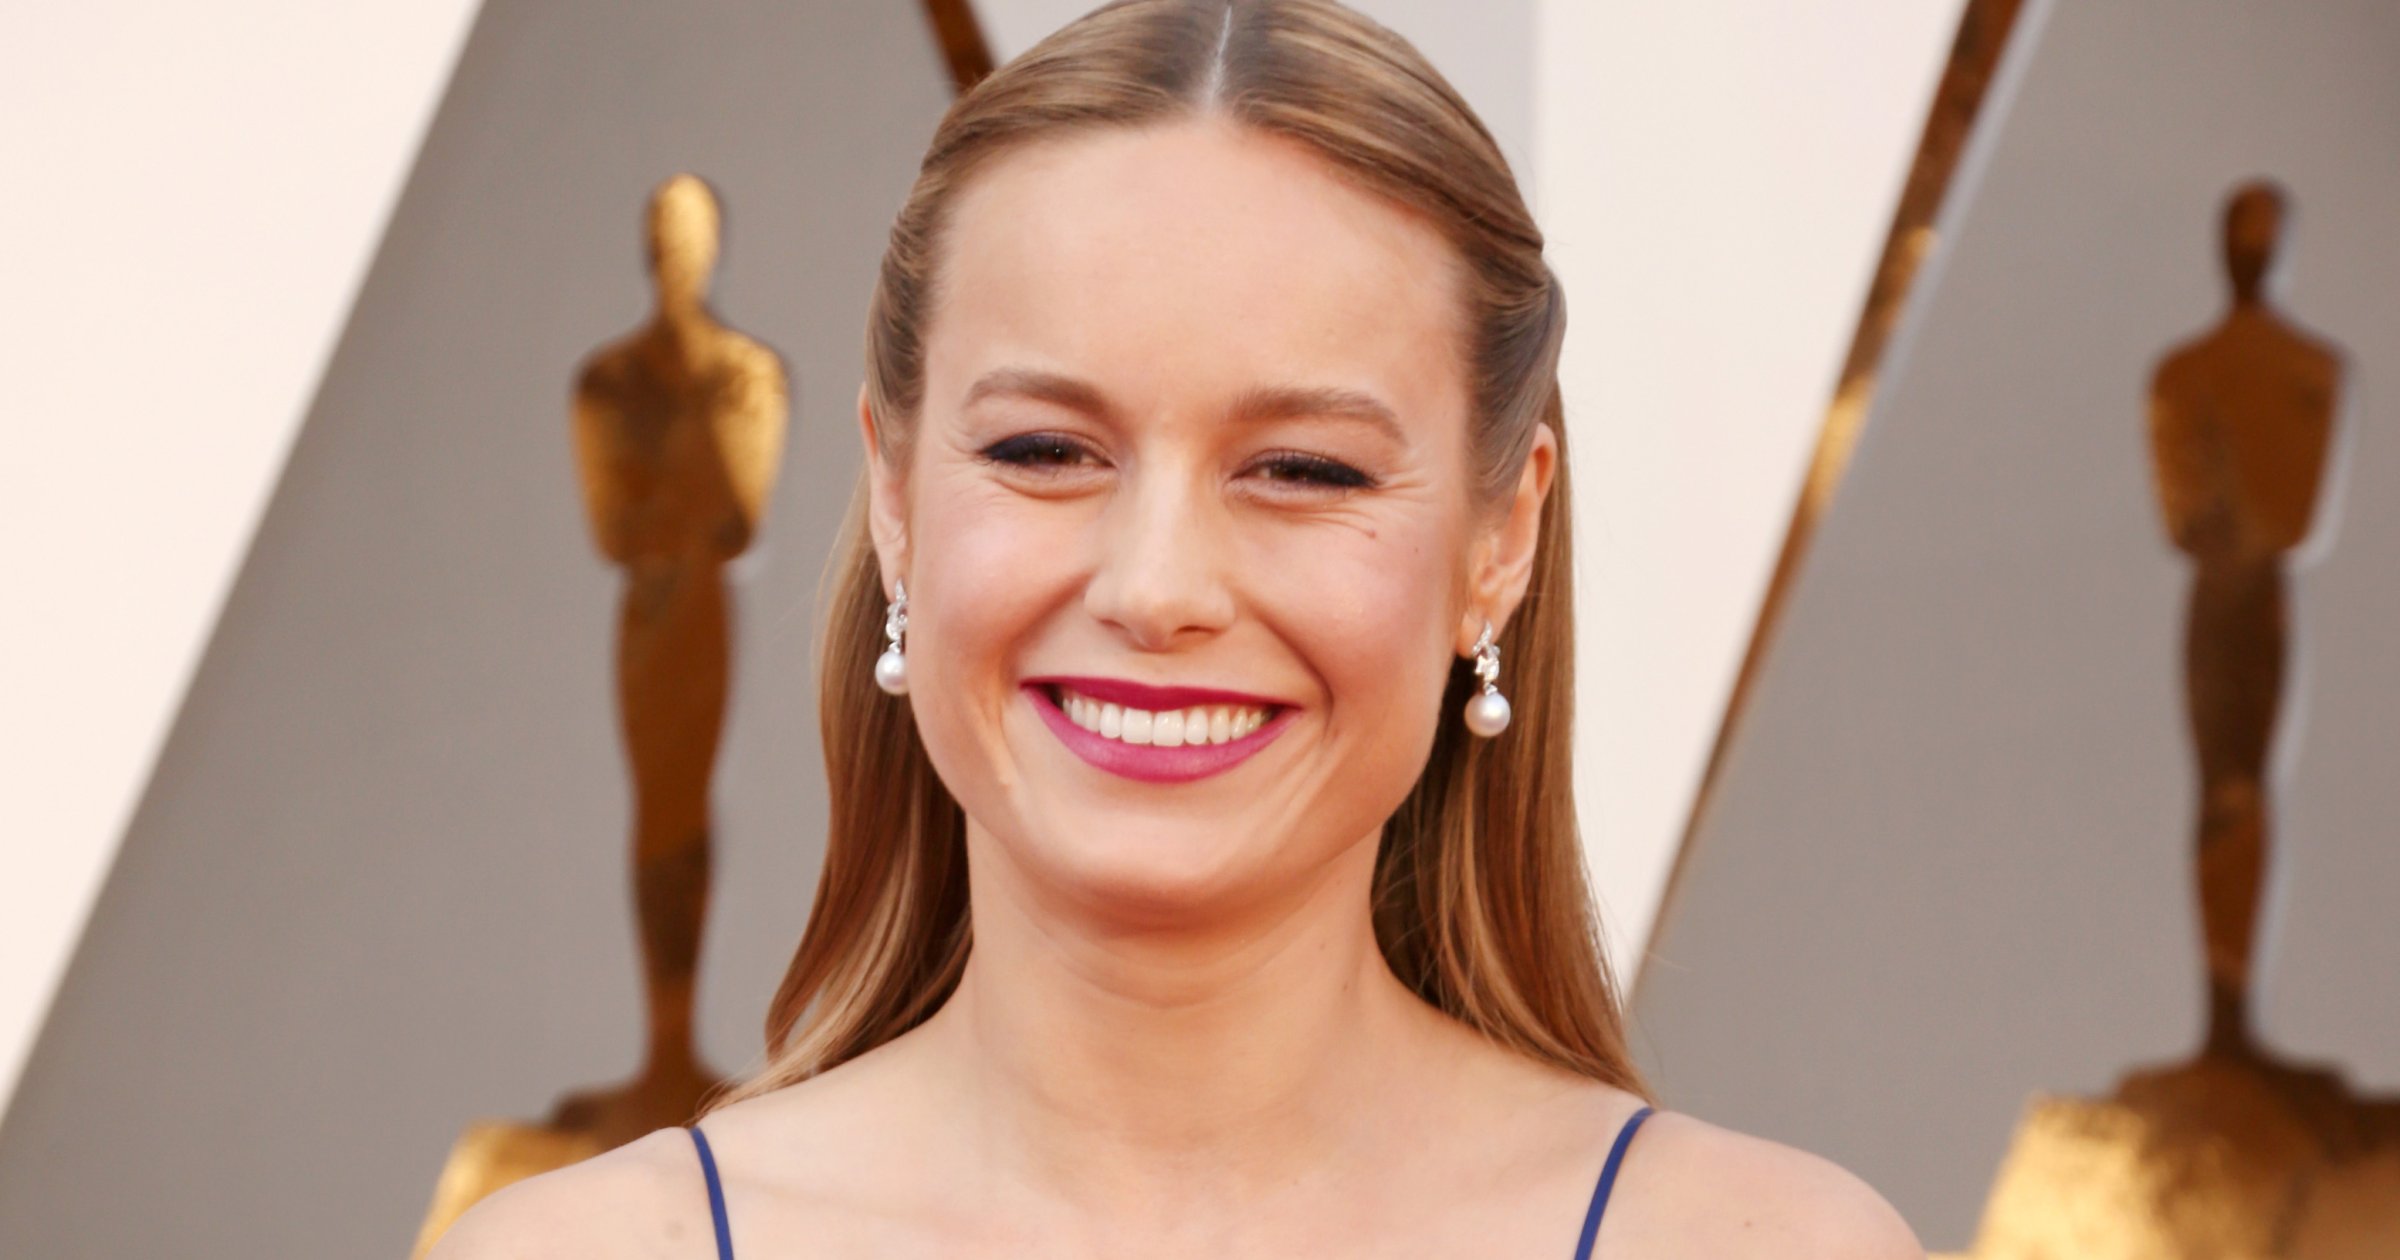 Brie Larson attends the 88th Annual Academy Awards on Feb. 28, 2016 in Hollywood, Calif.